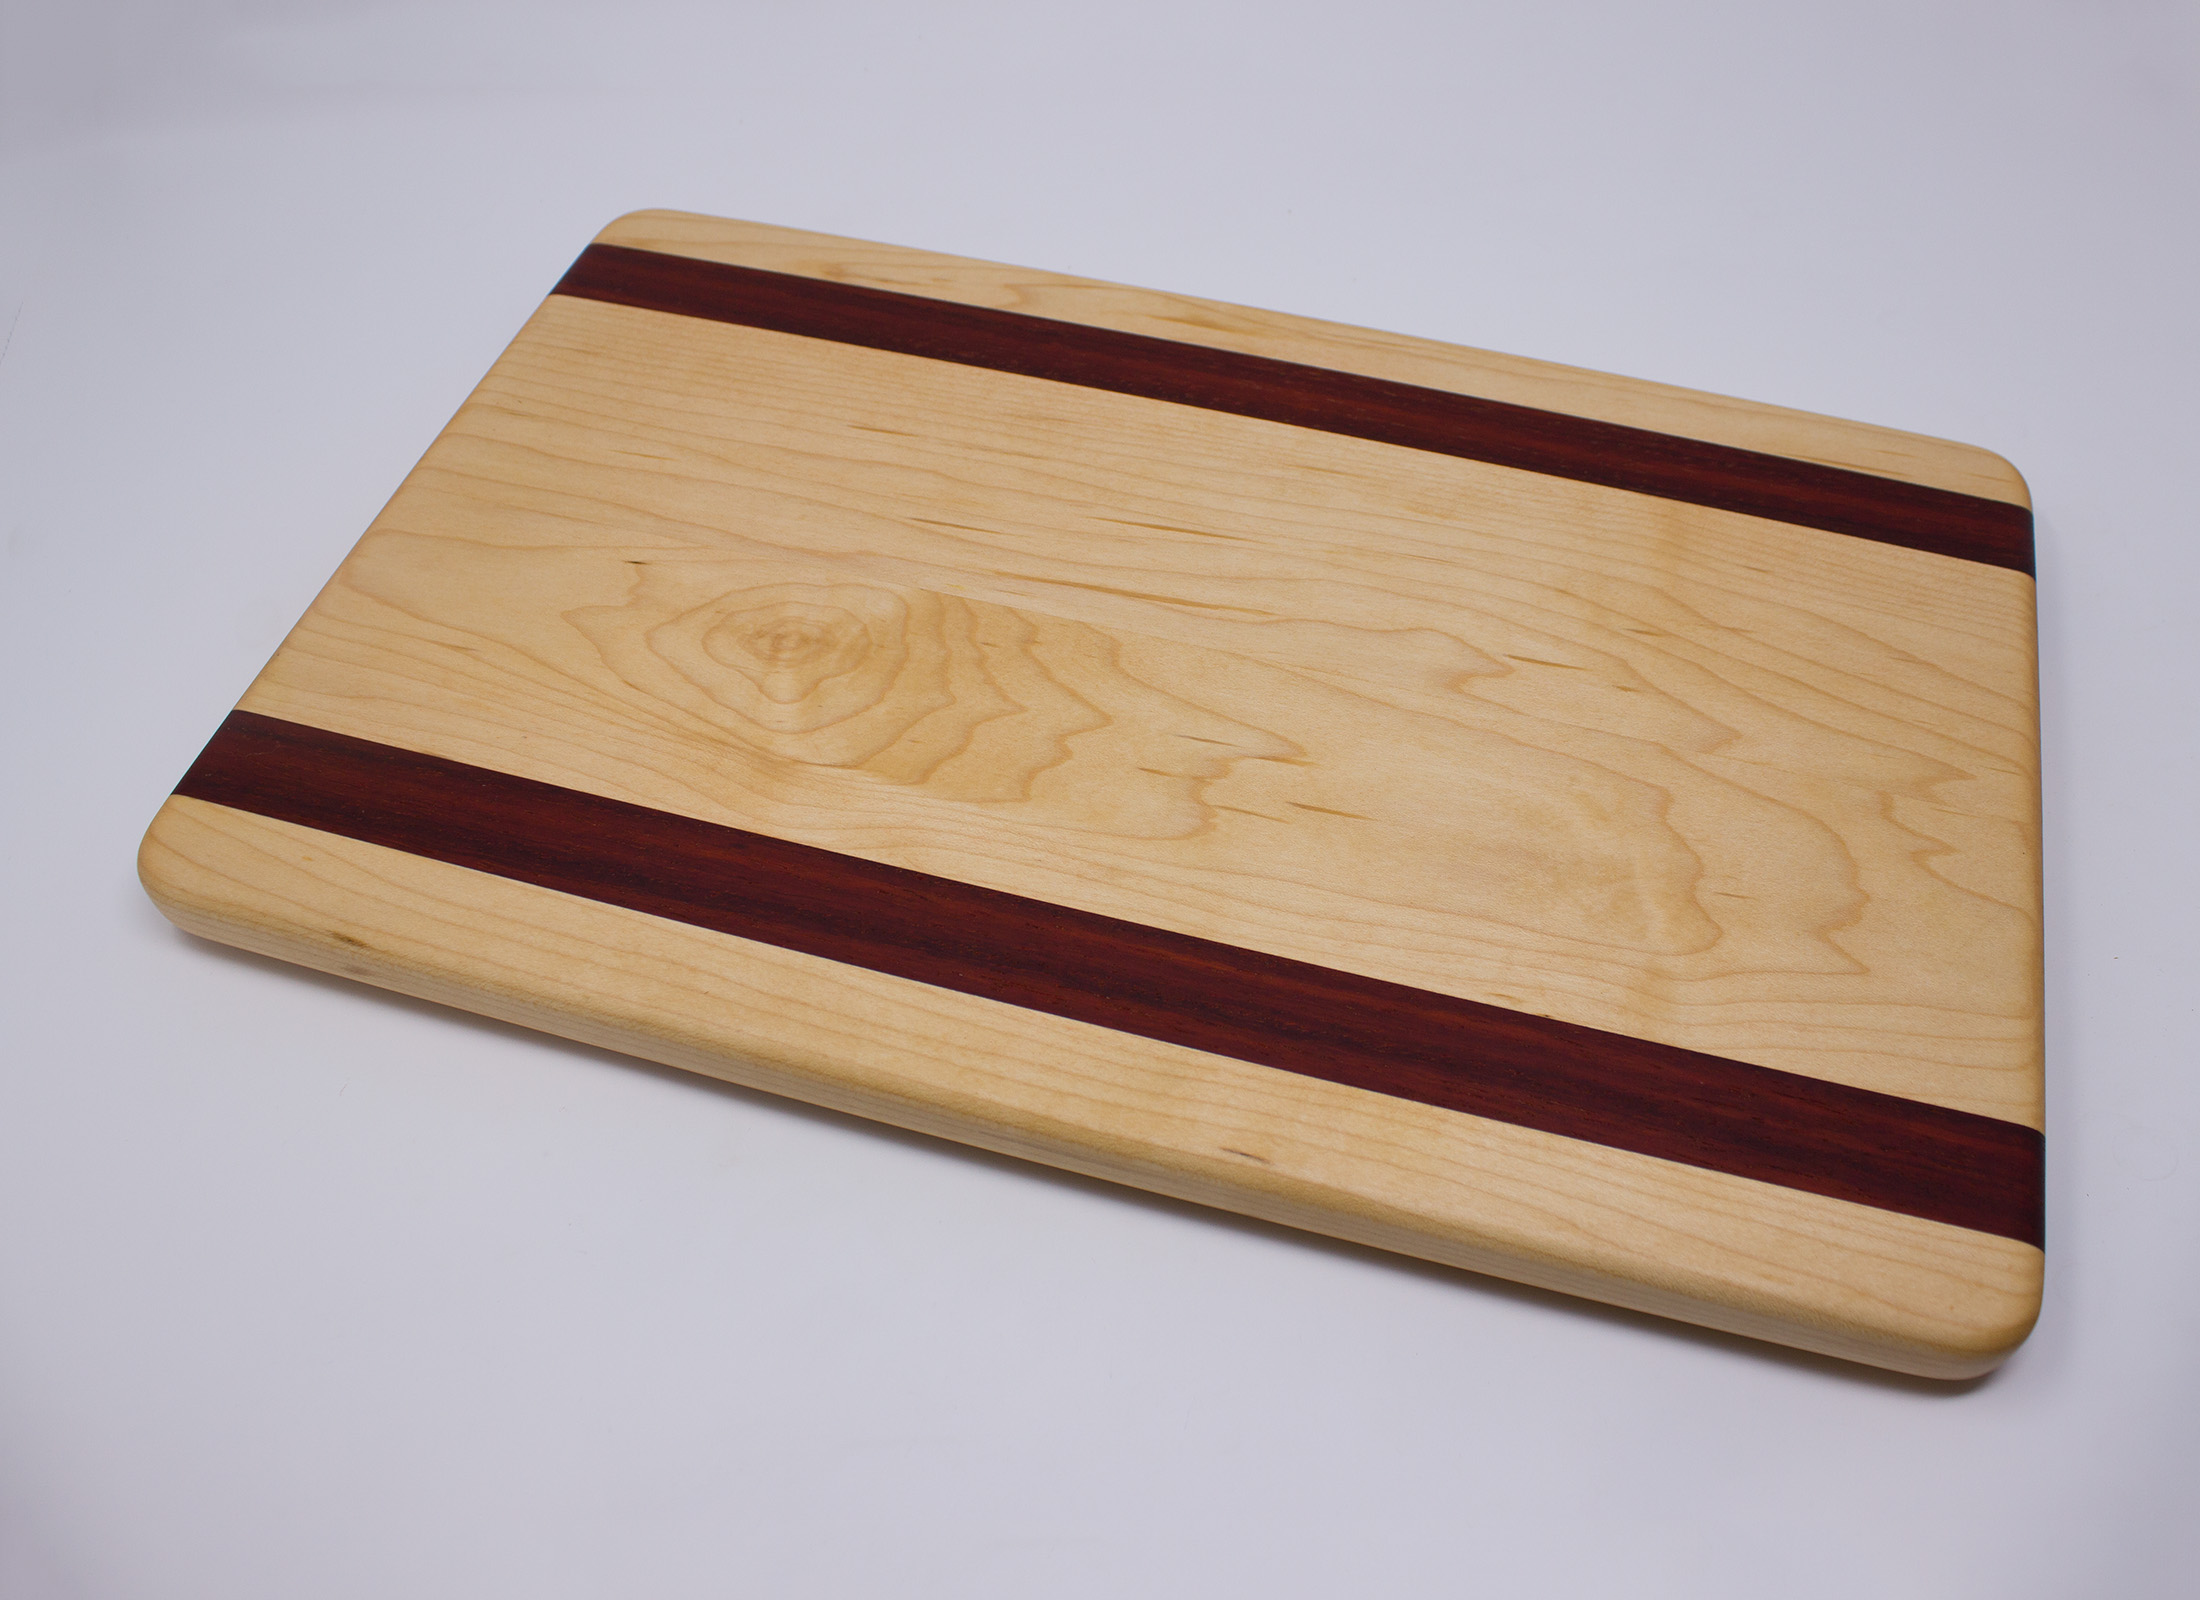 https://www.rockfordwoodcrafts.com/wp-content/uploads/Maple-with-Two-Large-Padauk-Stripes-Cutting-Board-Top-Angled.jpg